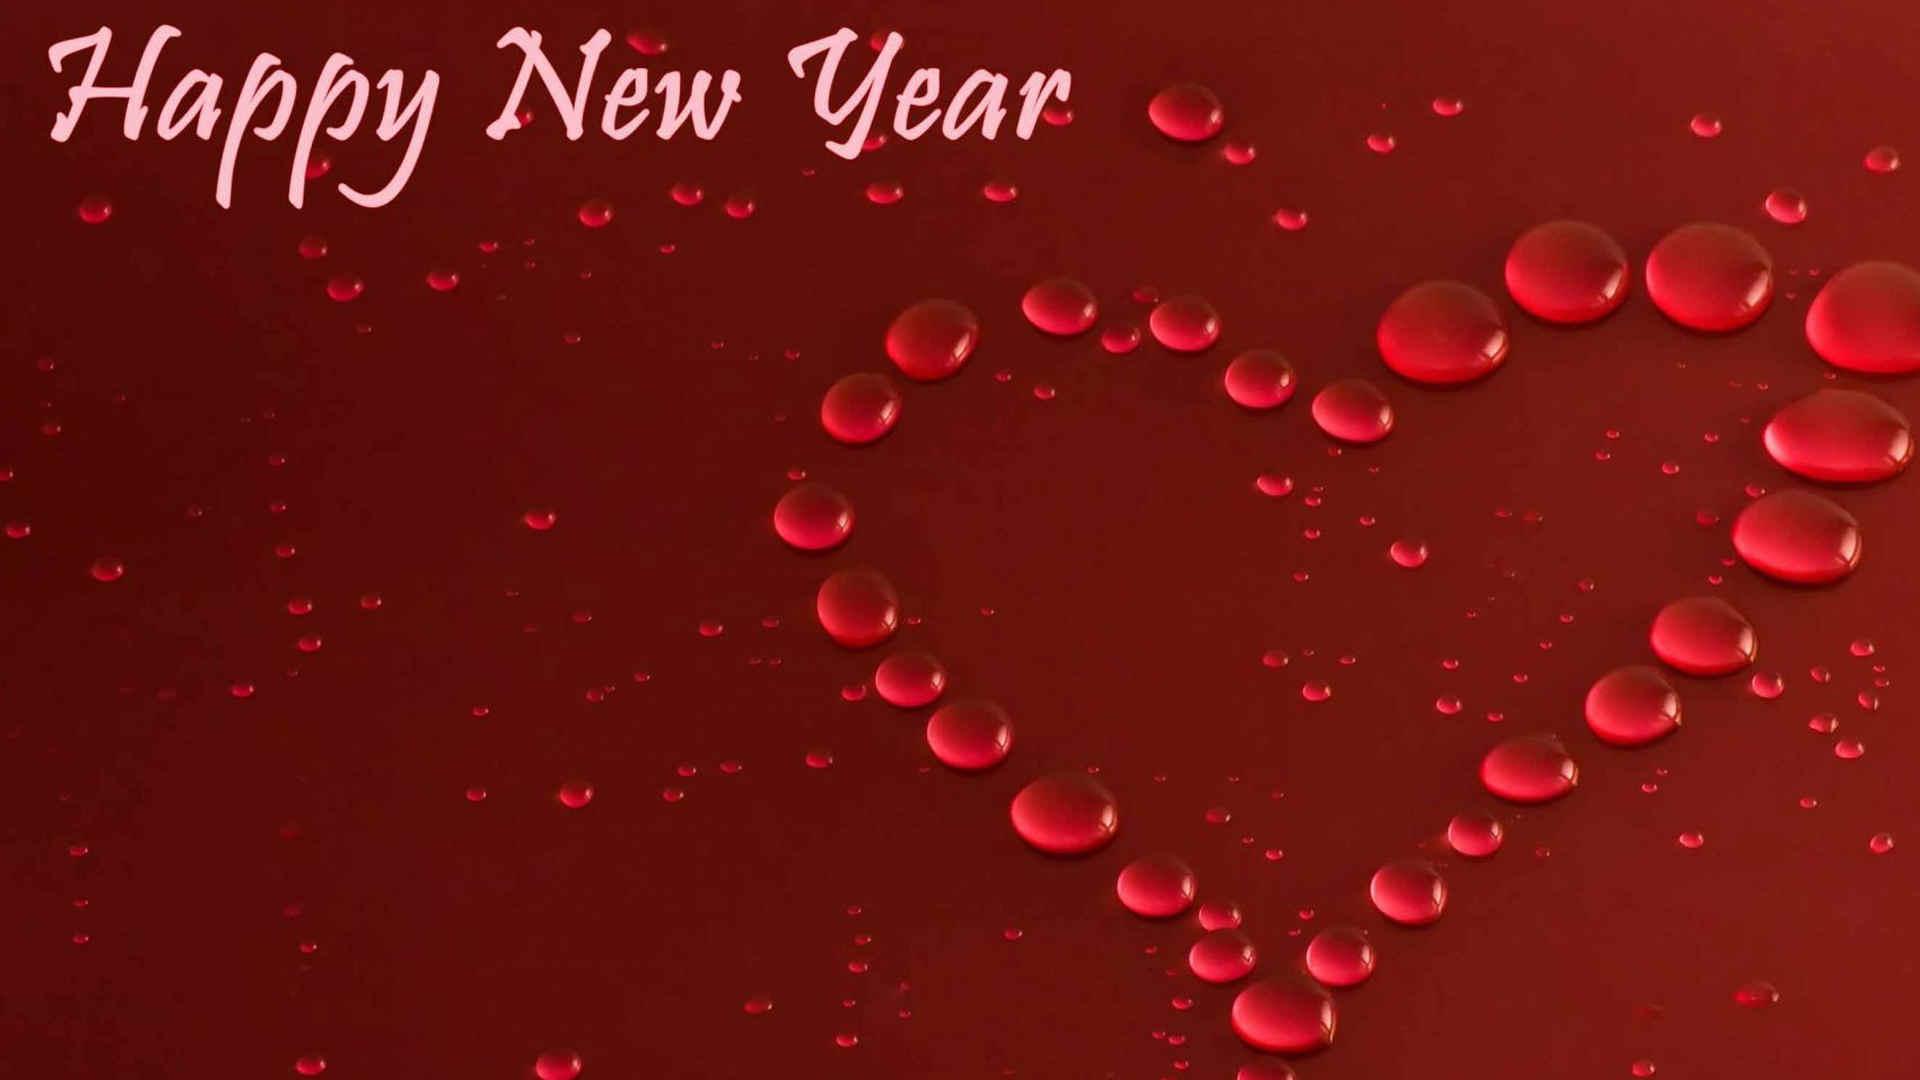 Happy New Year 2019 Messages: Happy New Year 2019 Text SMS